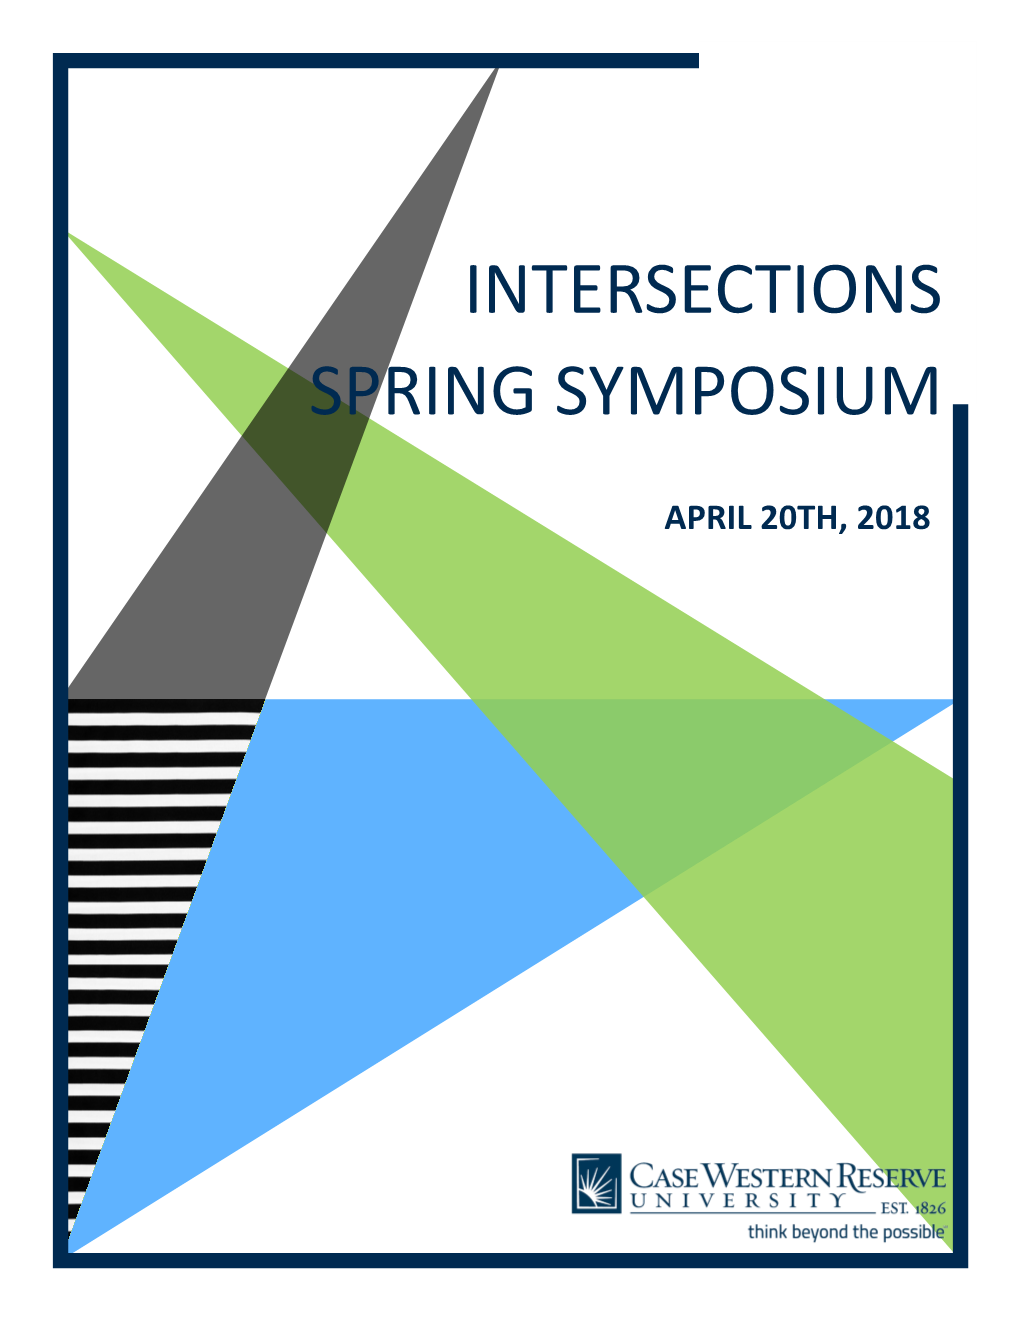 Intersections Spring Symposium